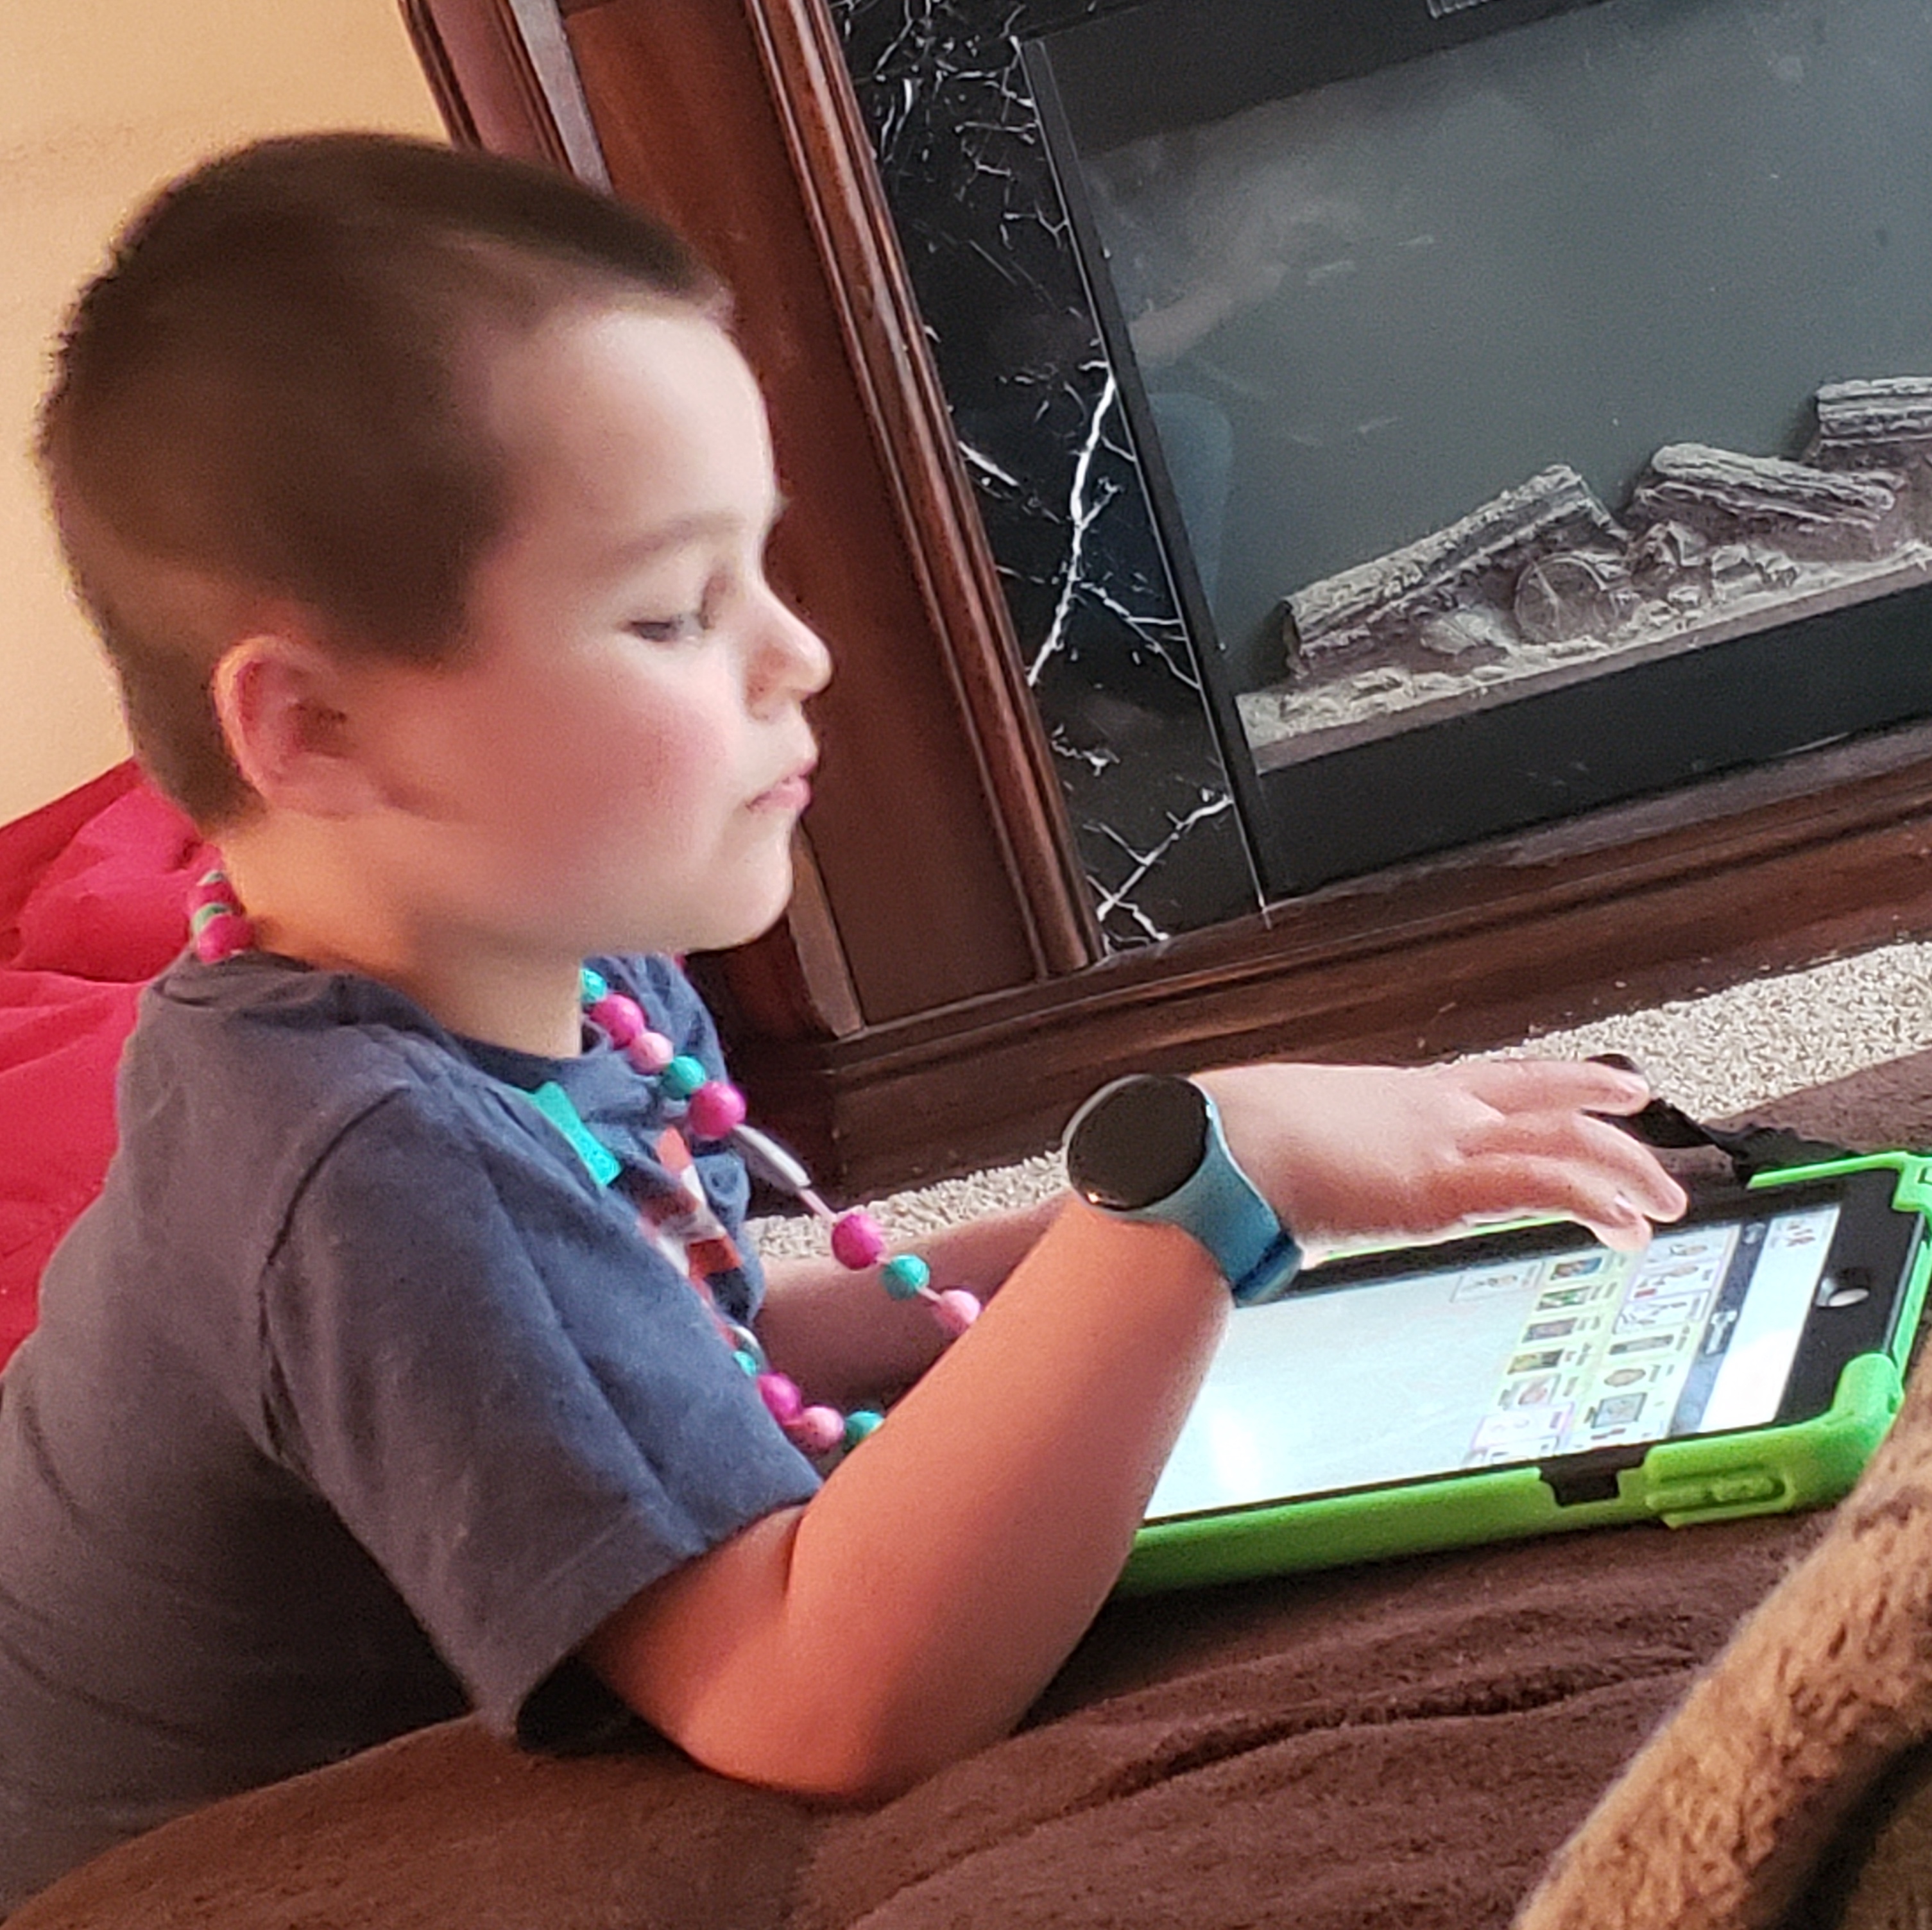 Kaysen, a young boy with short brown hair, a gray shirt, and rainbow beaded necklace, using an iPad.